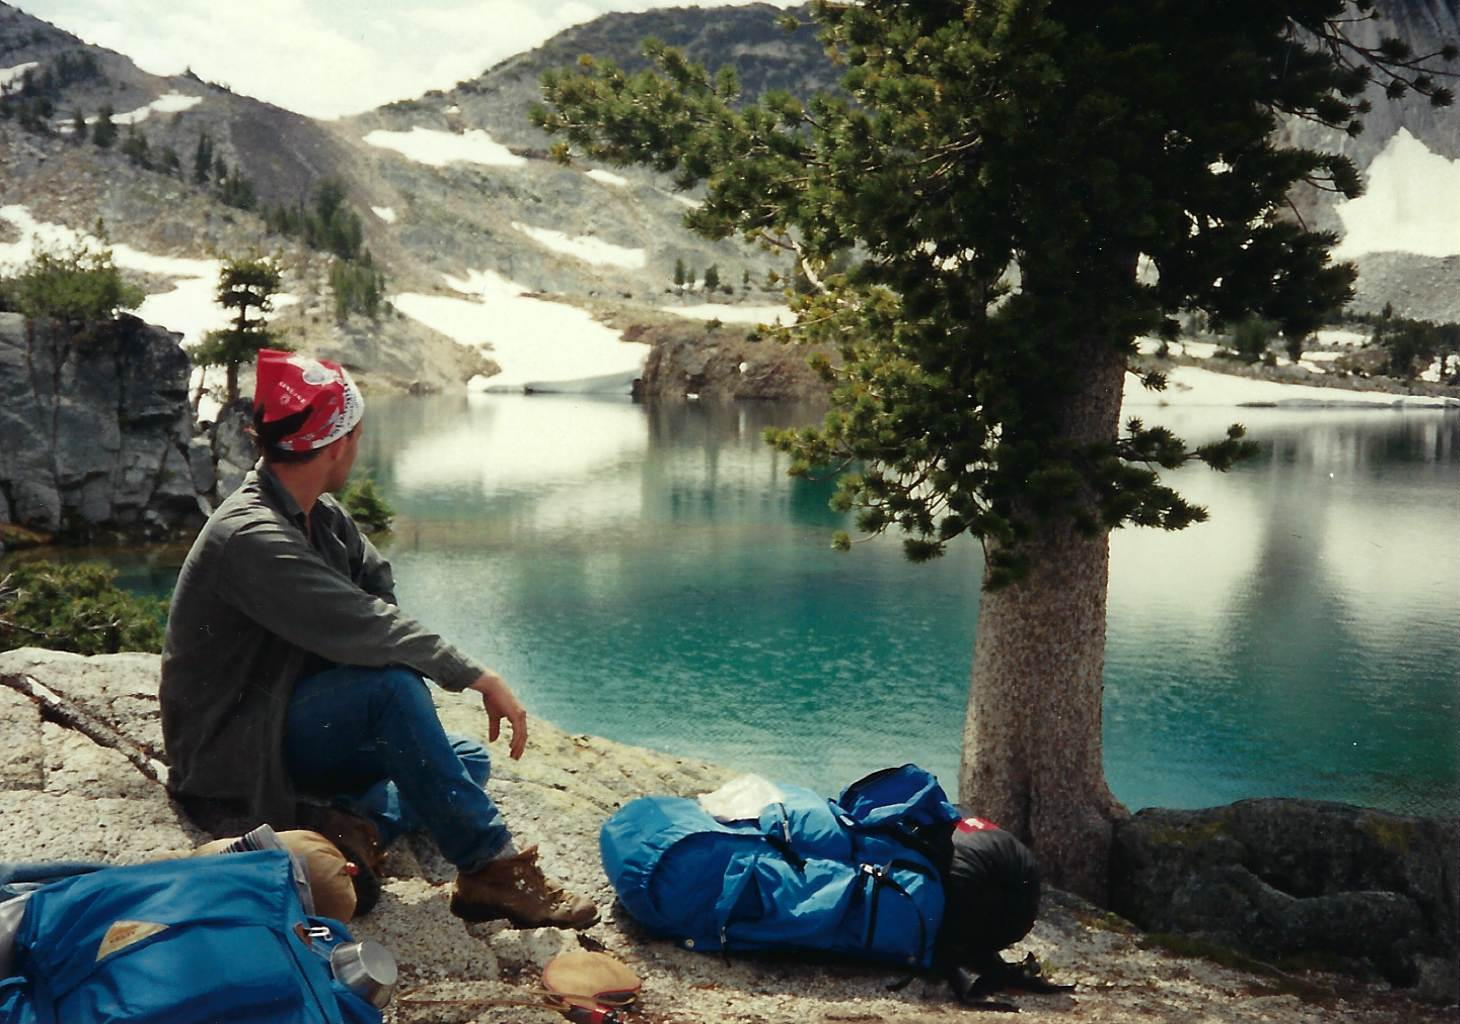 Image by the lake, Always Watching the World...., Glacier Lake, Eagle Cap Wilderness, 1990